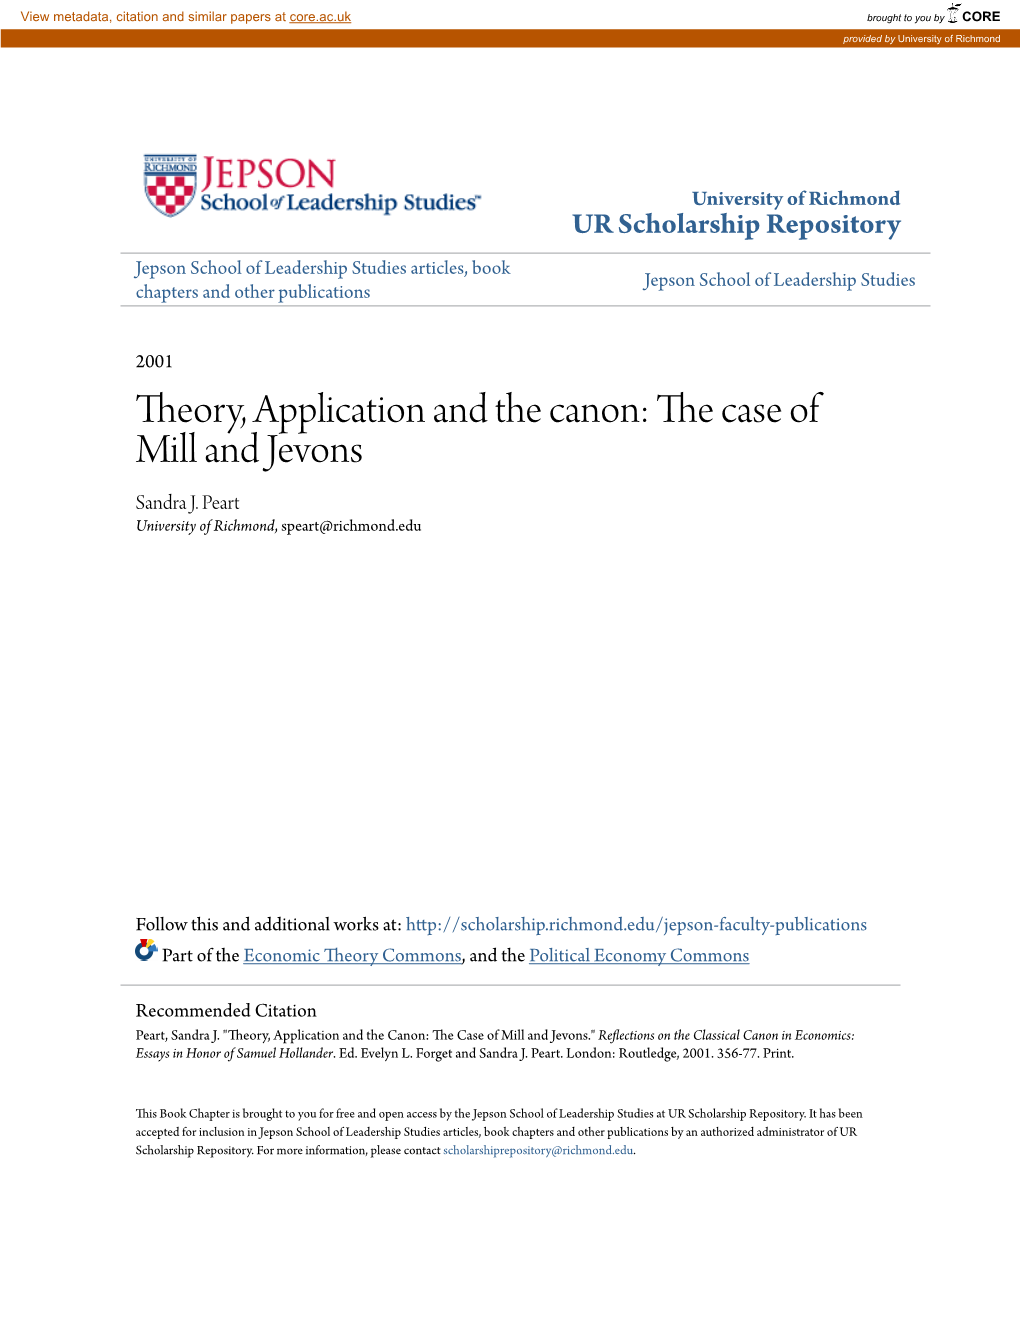 Theory, Application and the Canon: the Case of Mill and Jevons